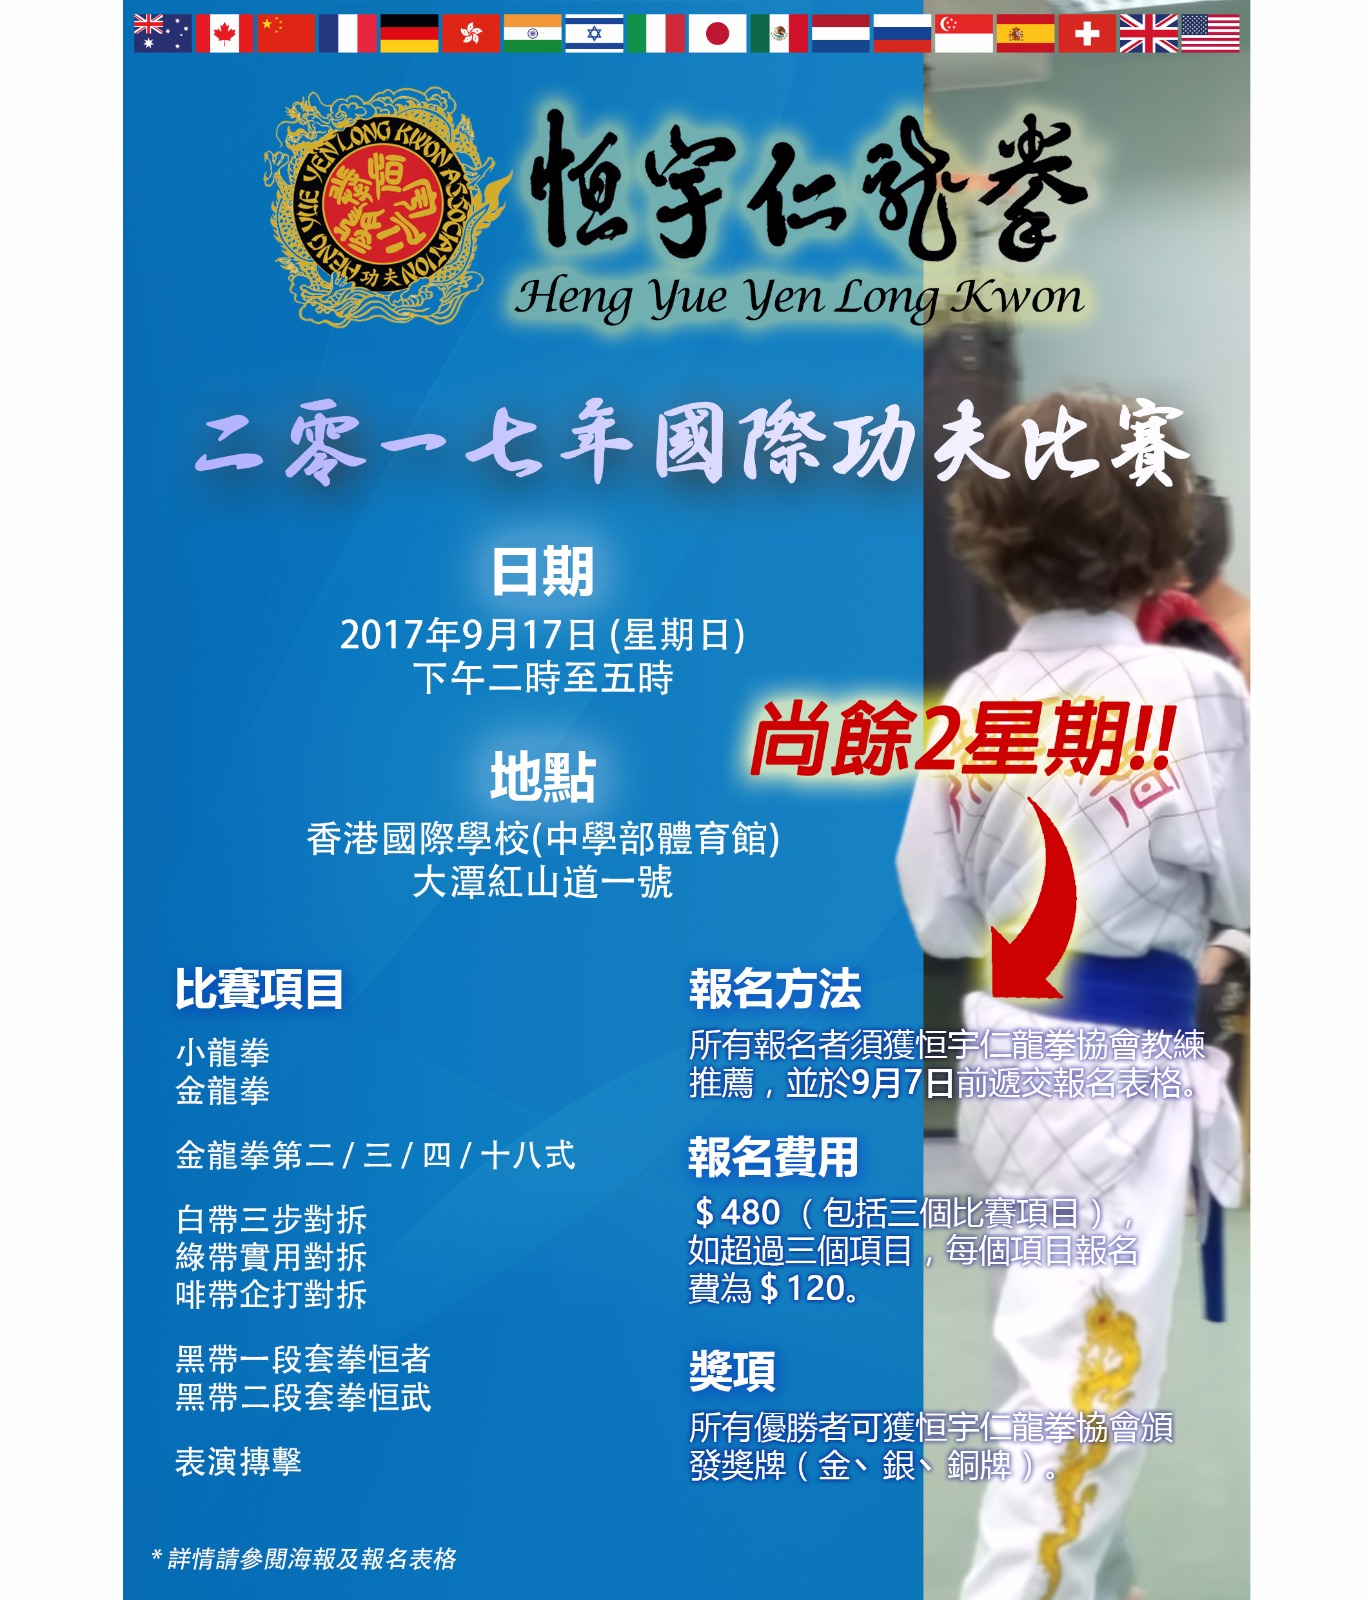 2017 International Kung Fu Competition